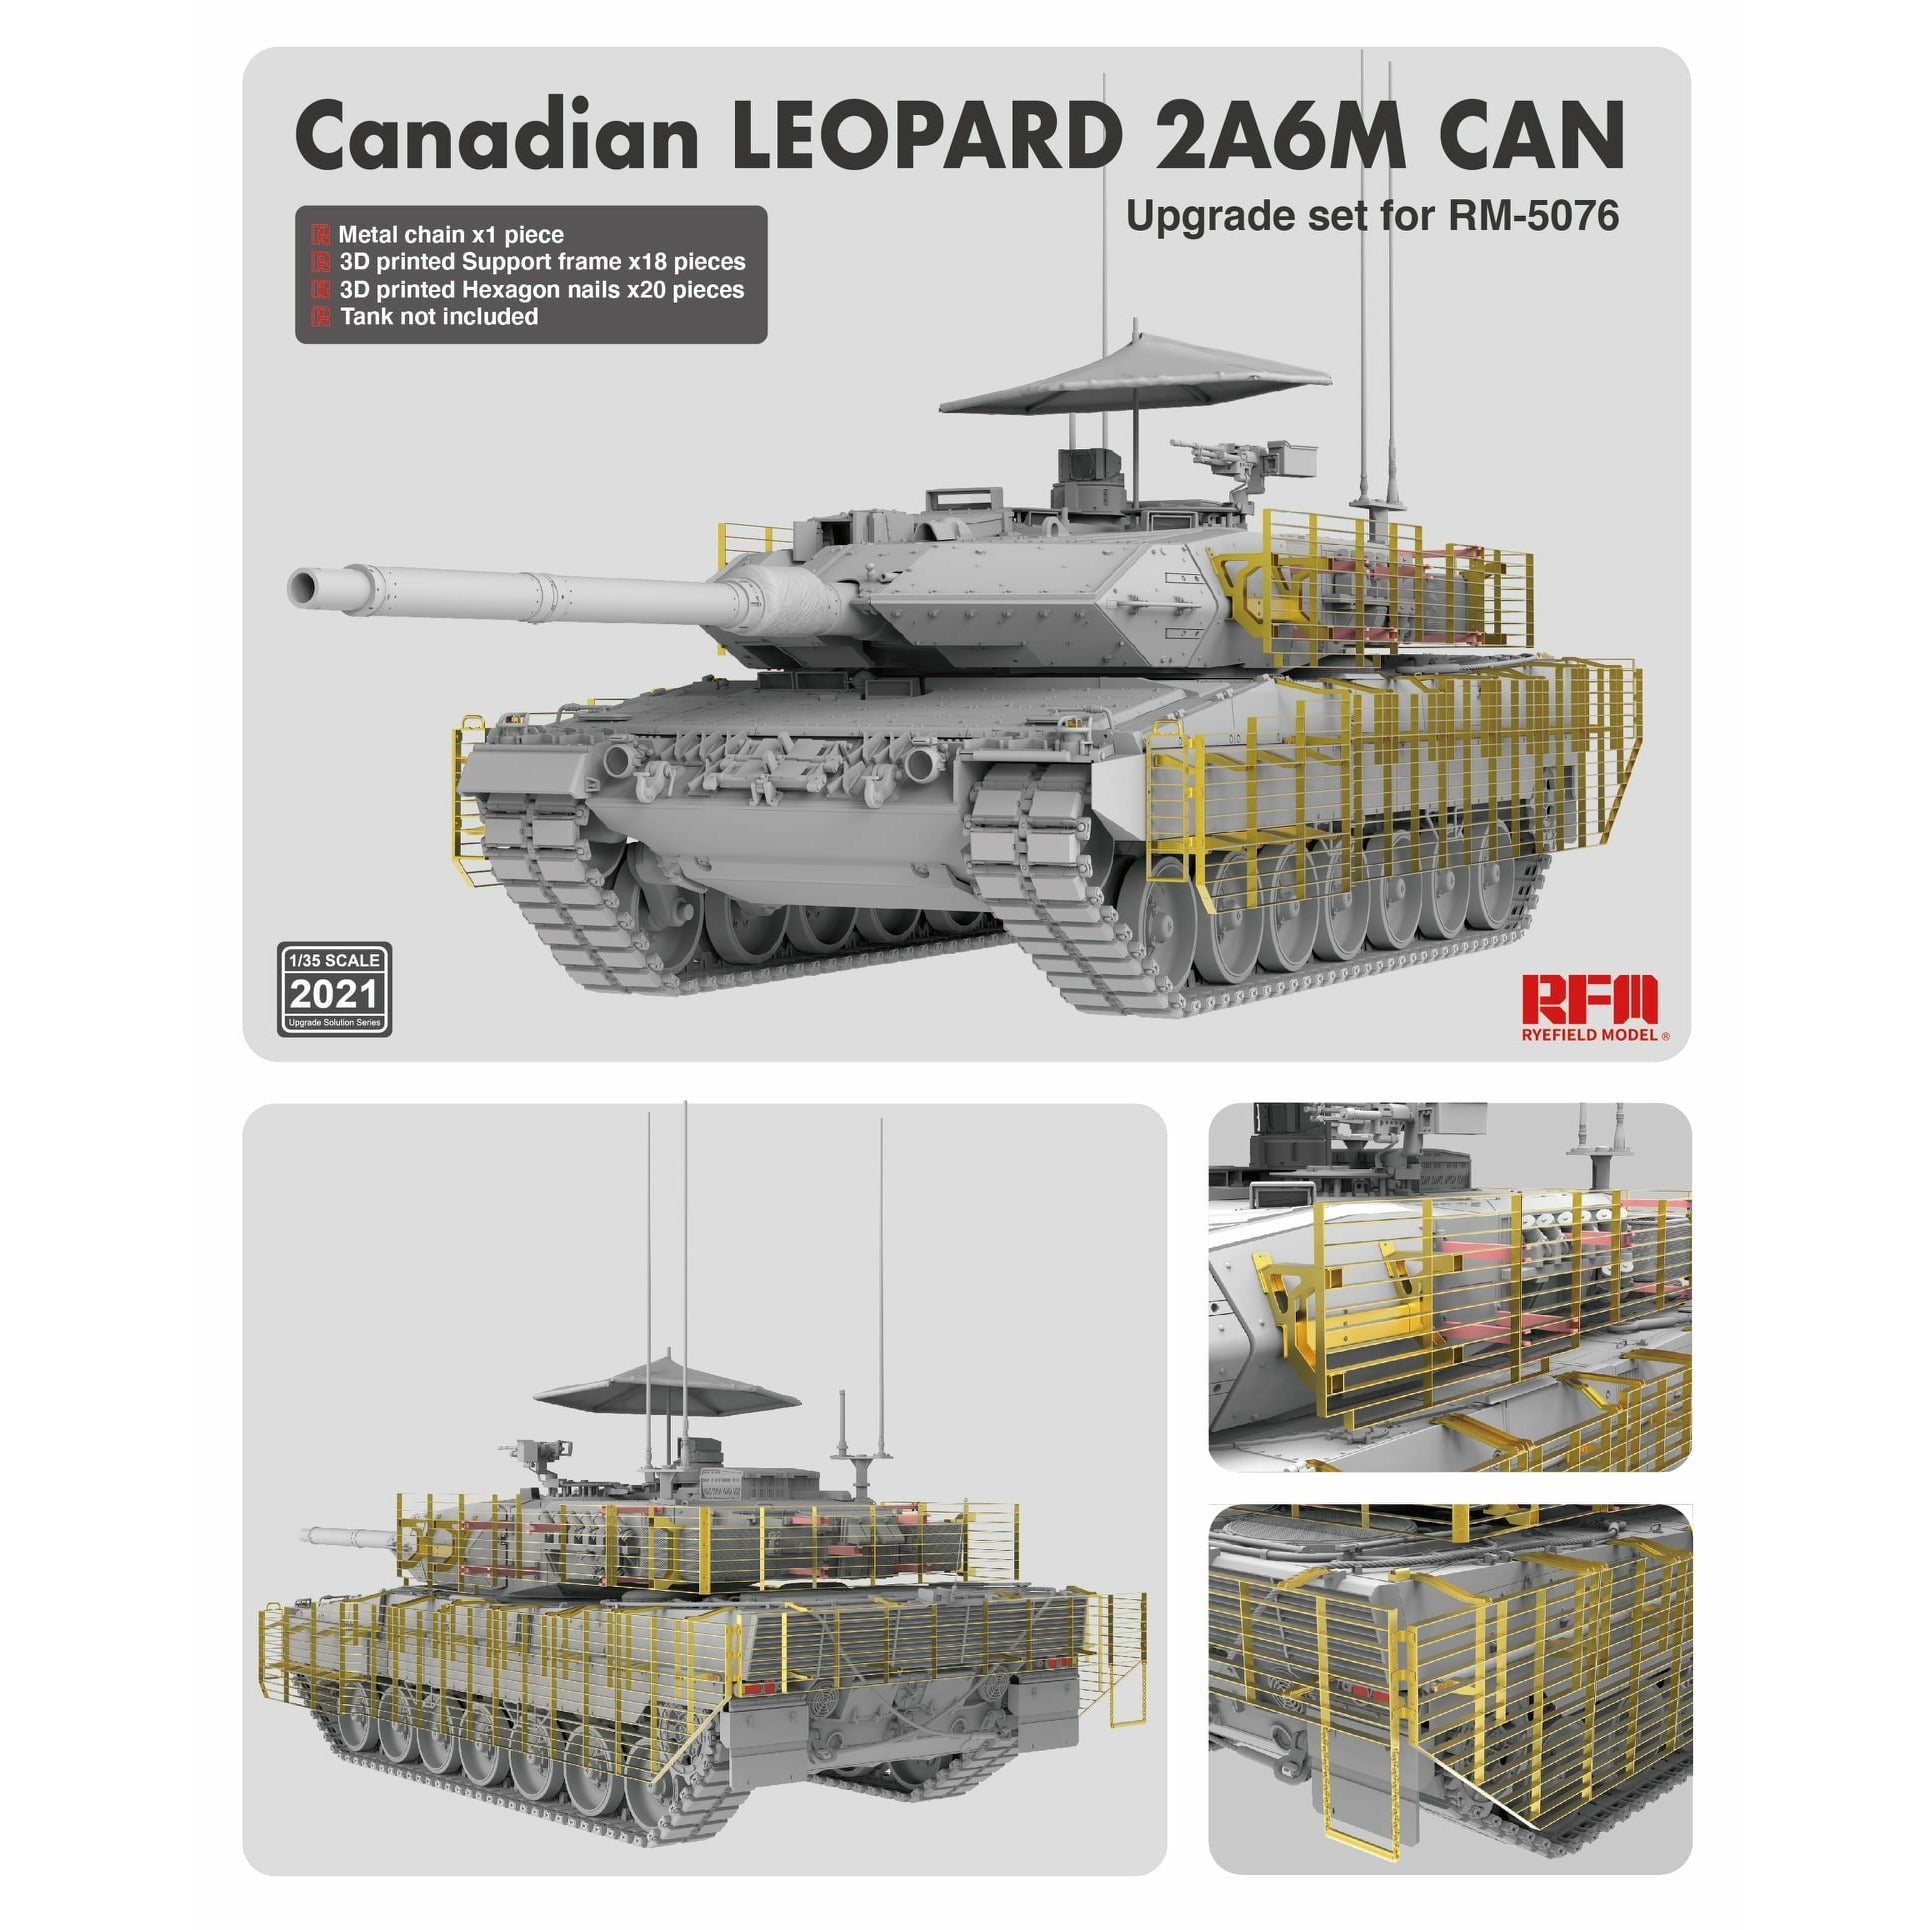 Upgrade Set: 5076 Canadian Leopard 2A6M by Ryfield Model